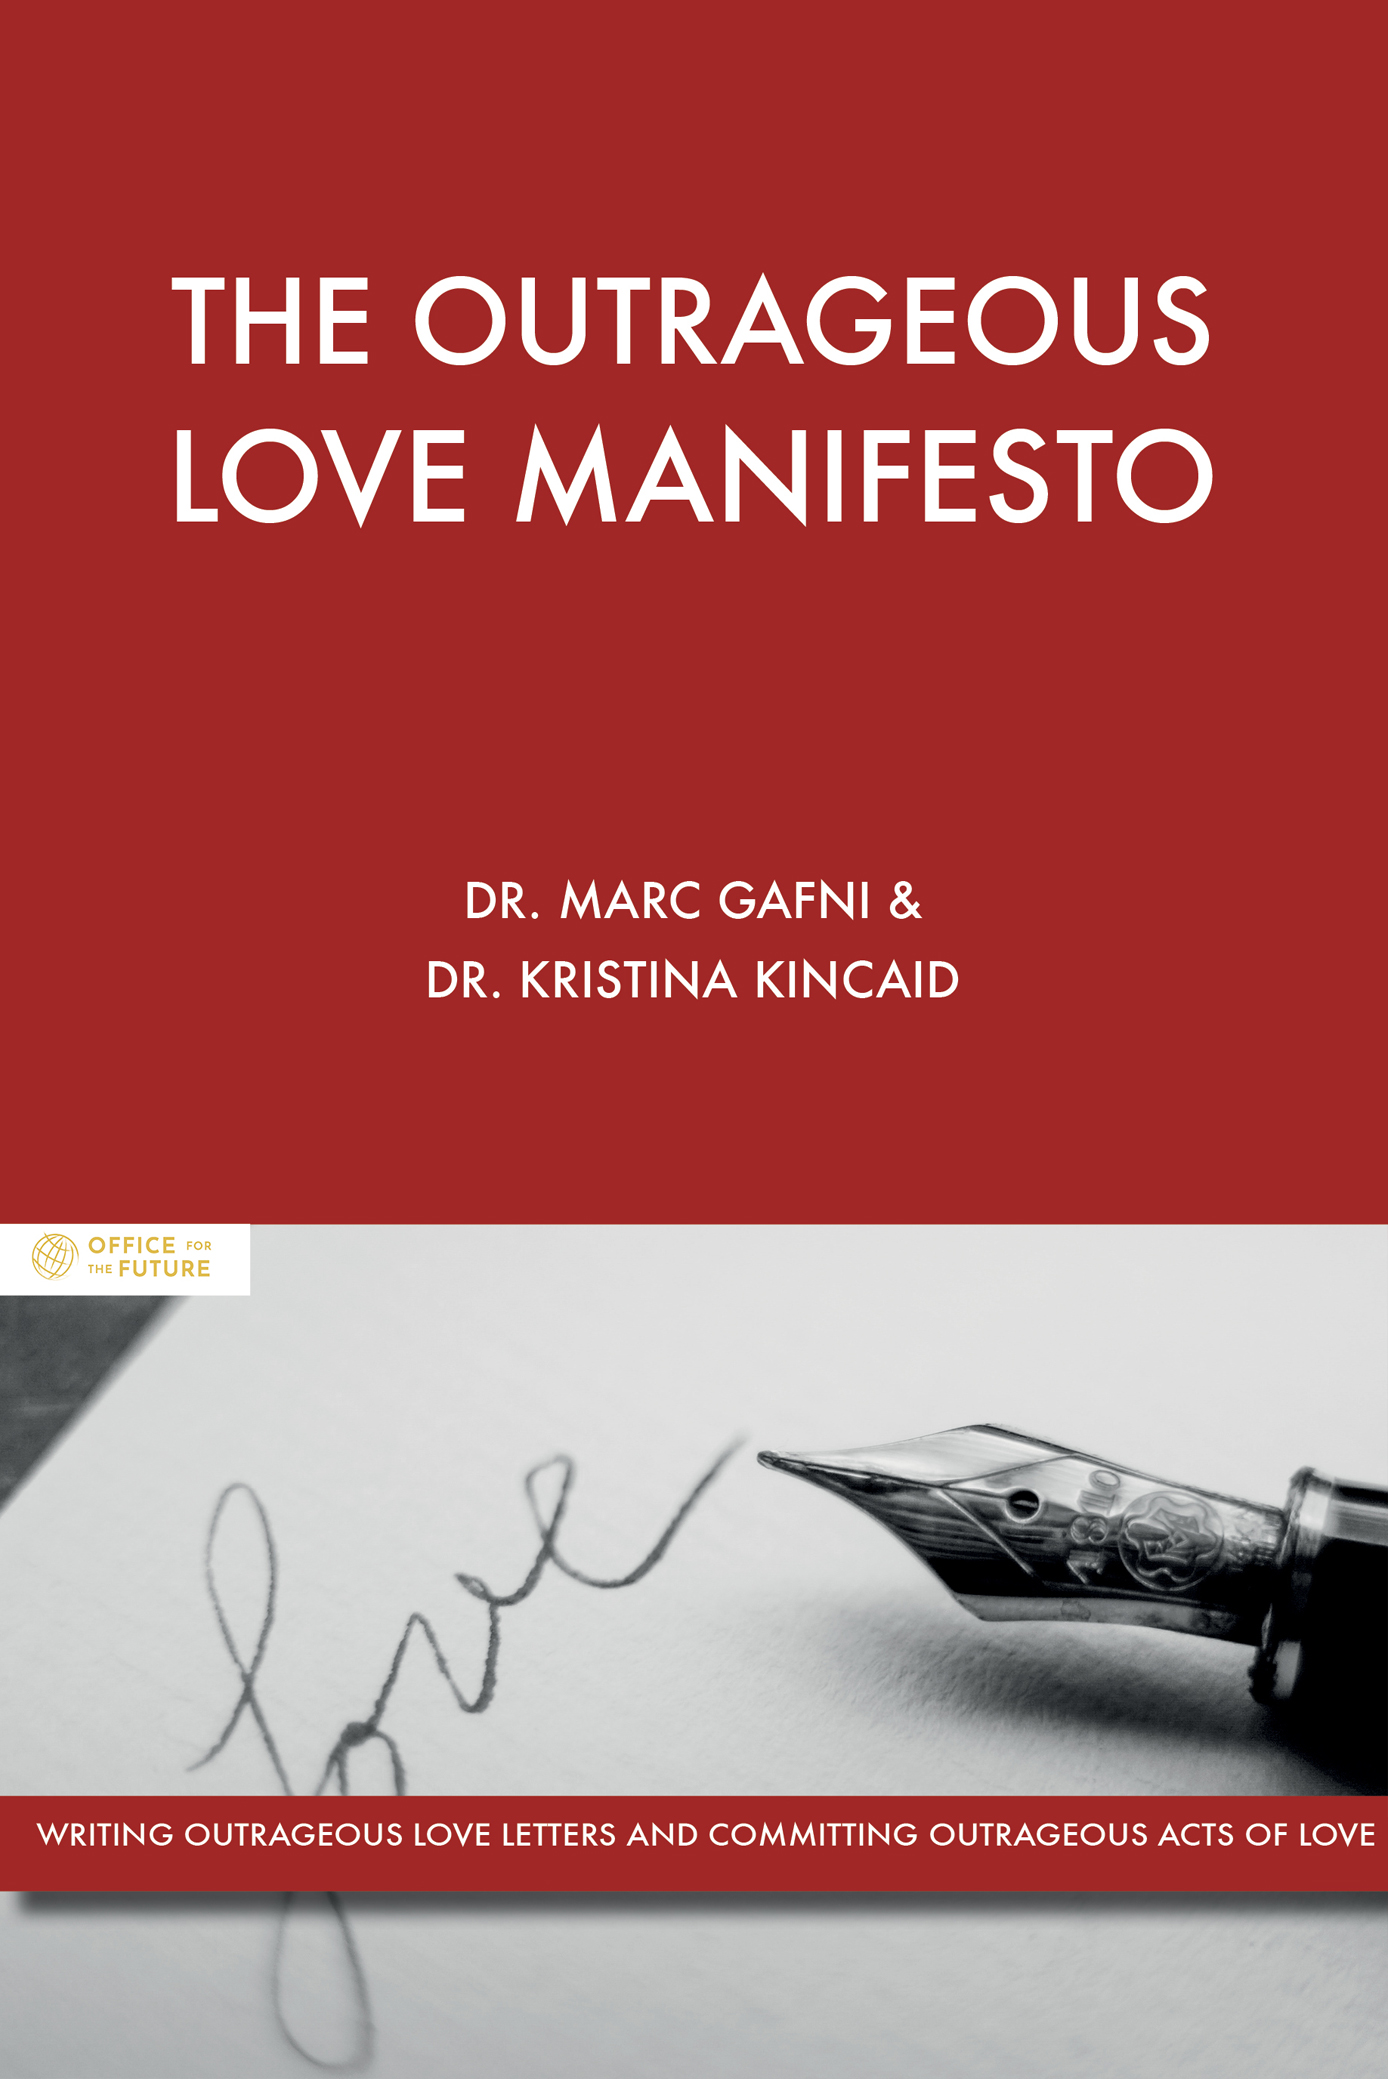 The Outrageous love manifesto